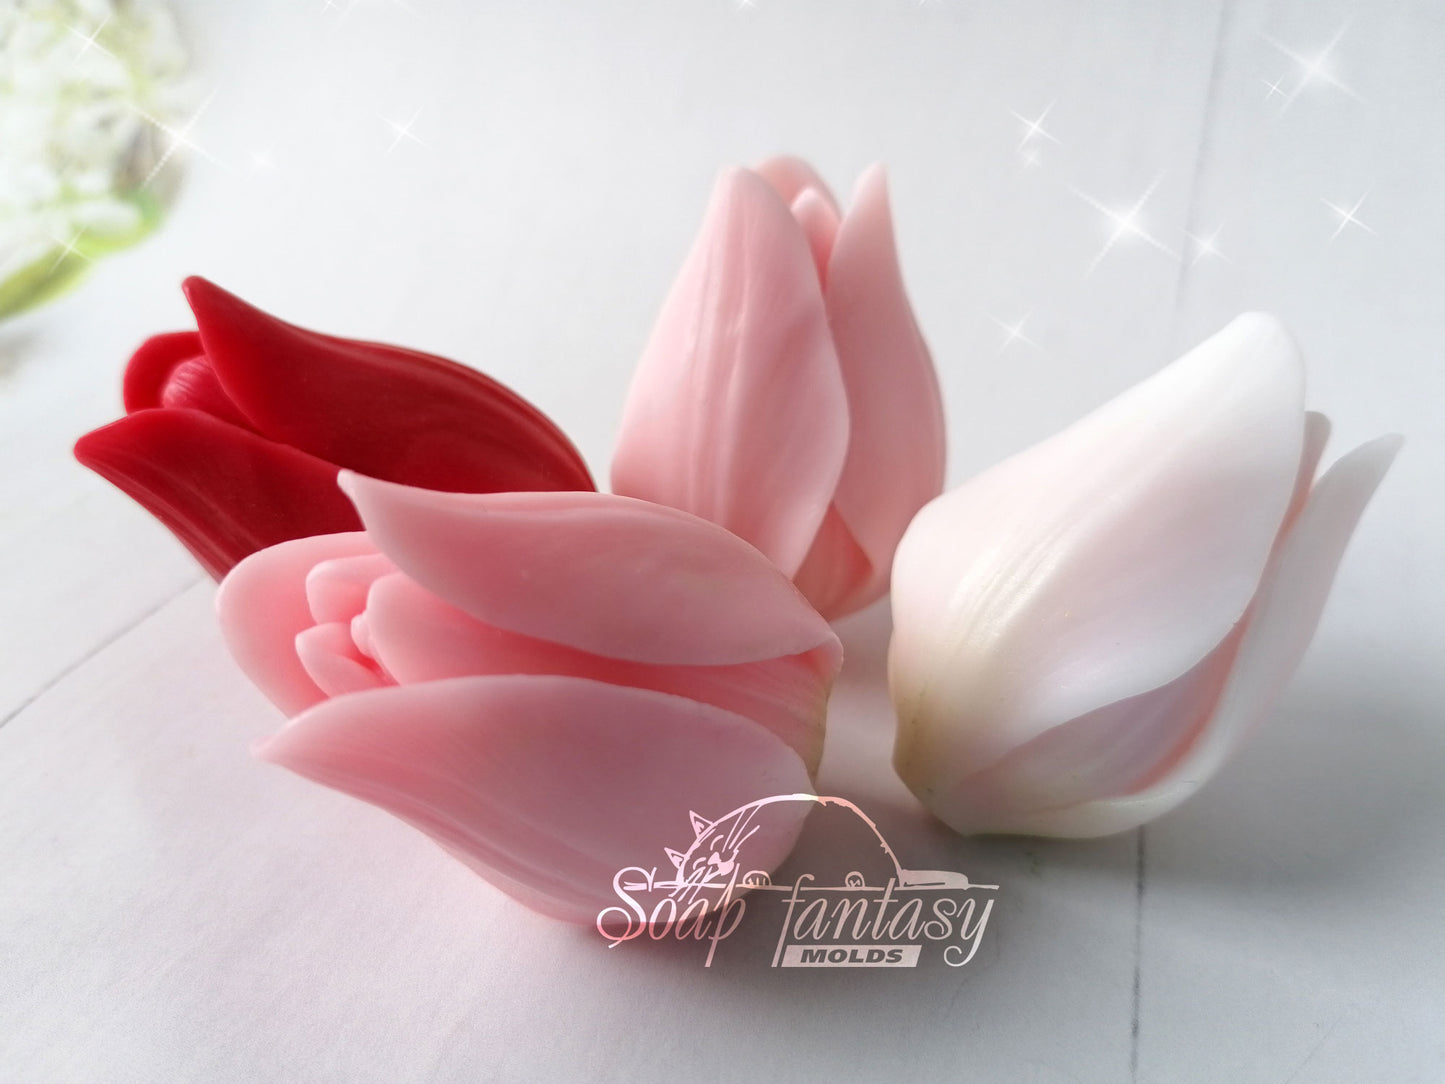 Tulip "Montreal" silicone mold for soap making